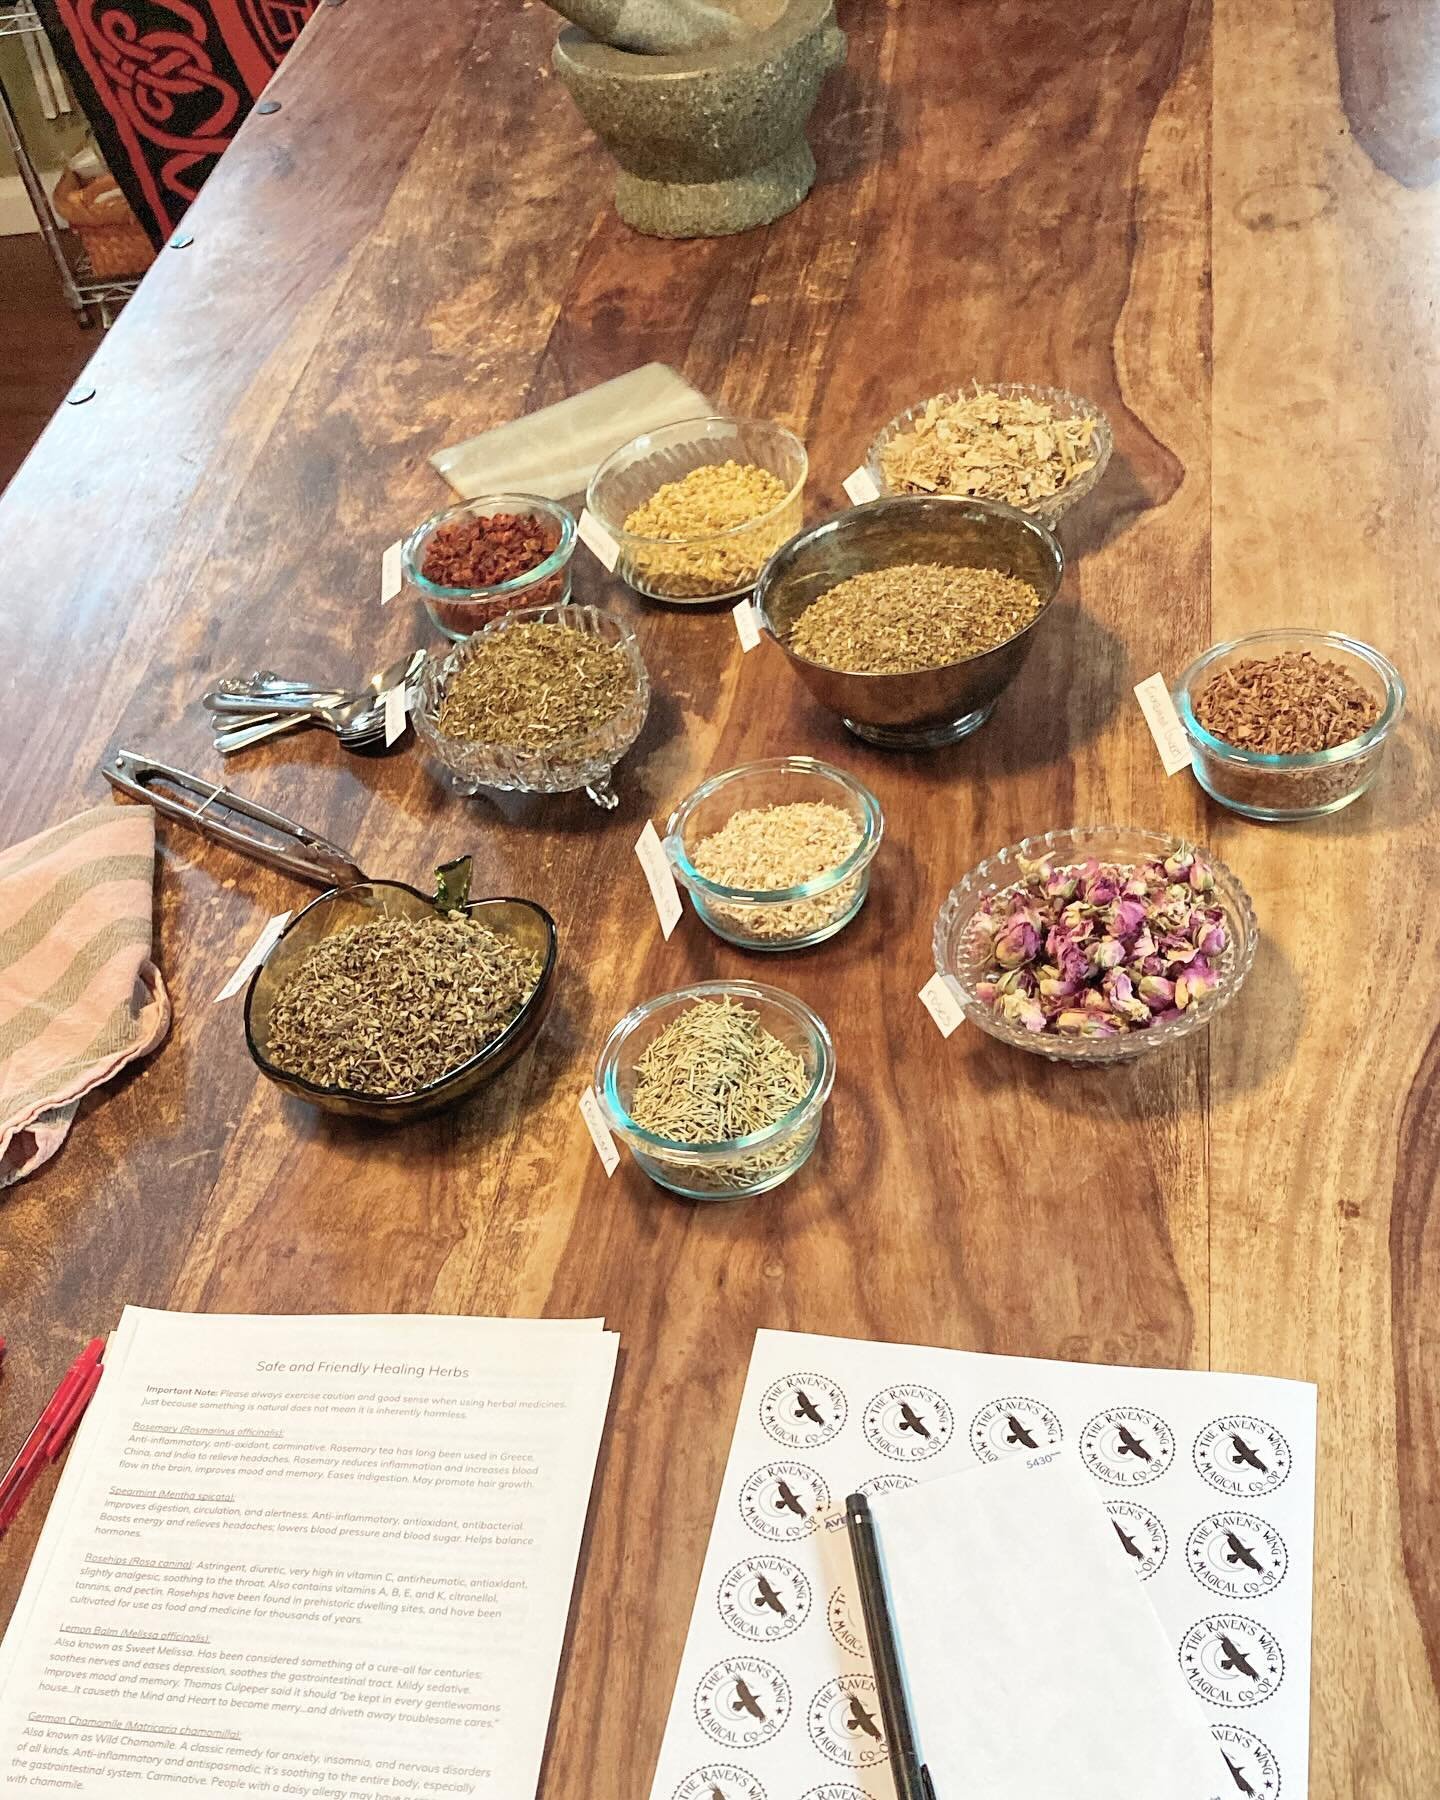 Tea for Tweens! Jenny is just about ready for the &ldquo;Safe and Friendly Healing Herbs&rdquo; class with kids from @sellwoodcommunityhouse. 

#tweens #pdxwitchshop #sellwood #community #yourneighborhoodwitches